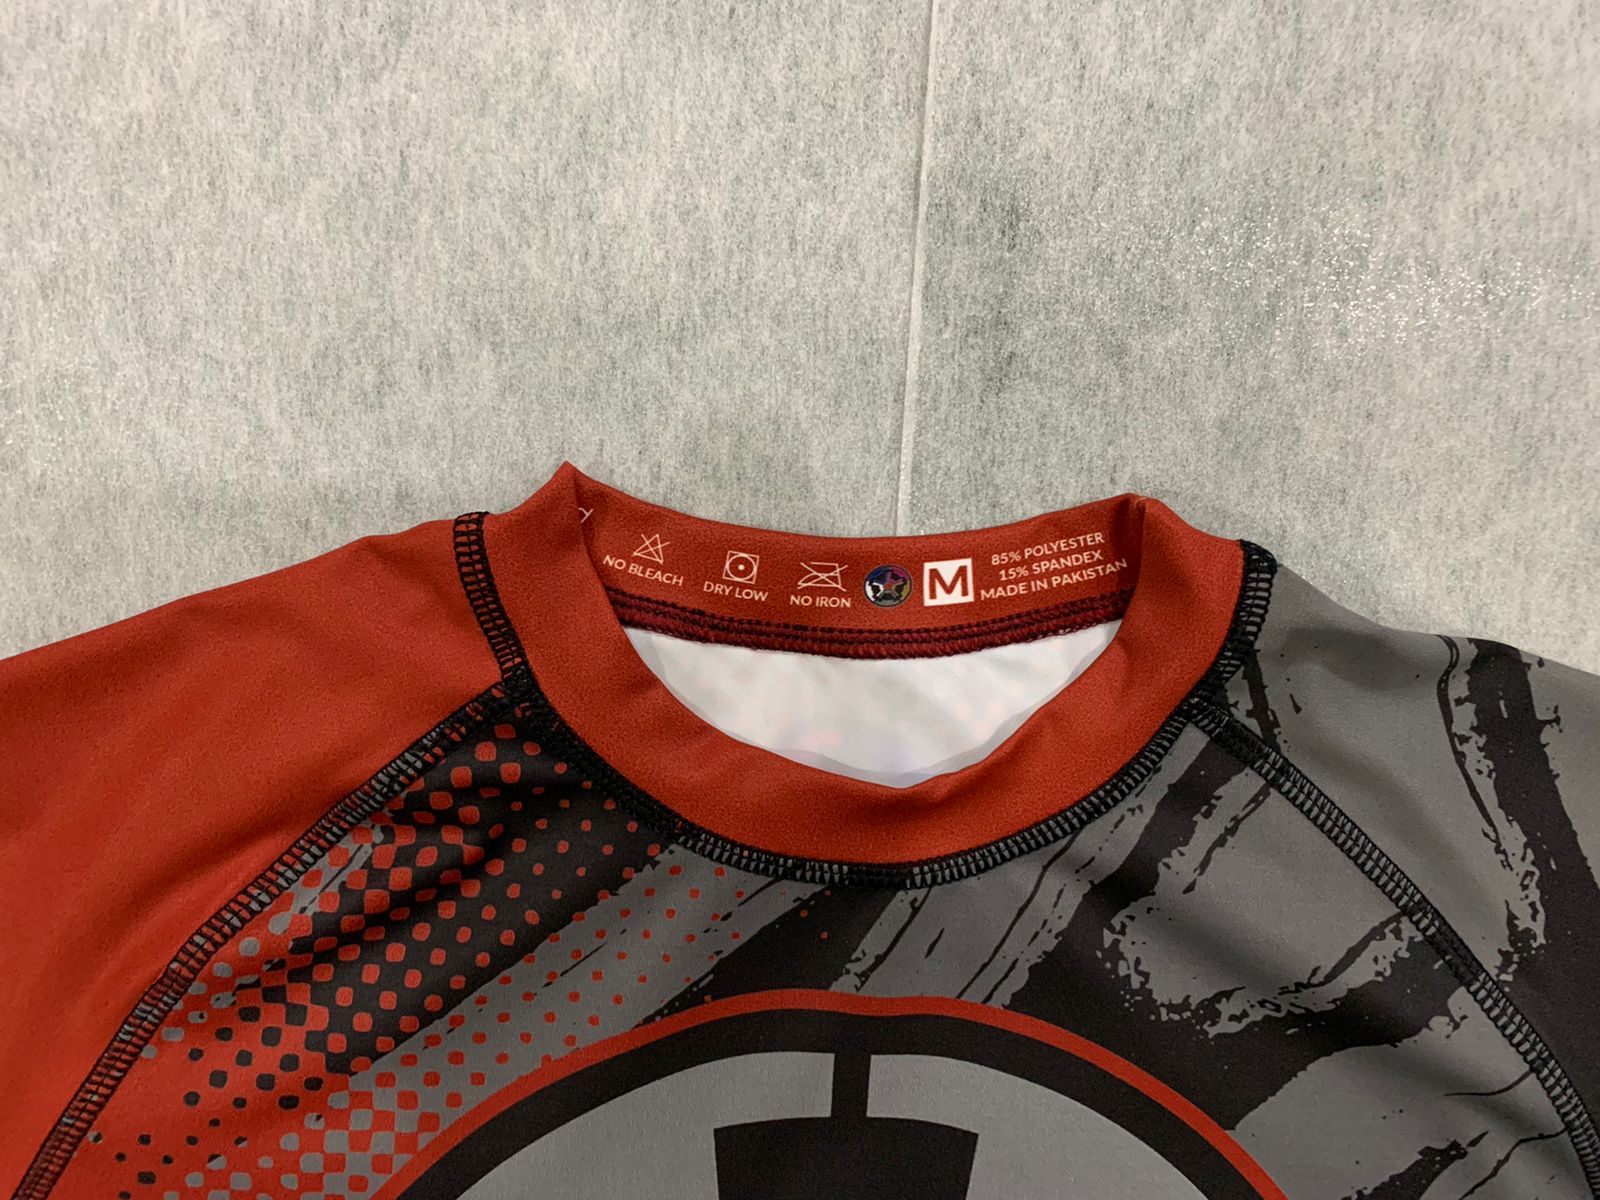 Welcome to the D'arce Side Short Sleeve Rashguard - TheSevenSubs